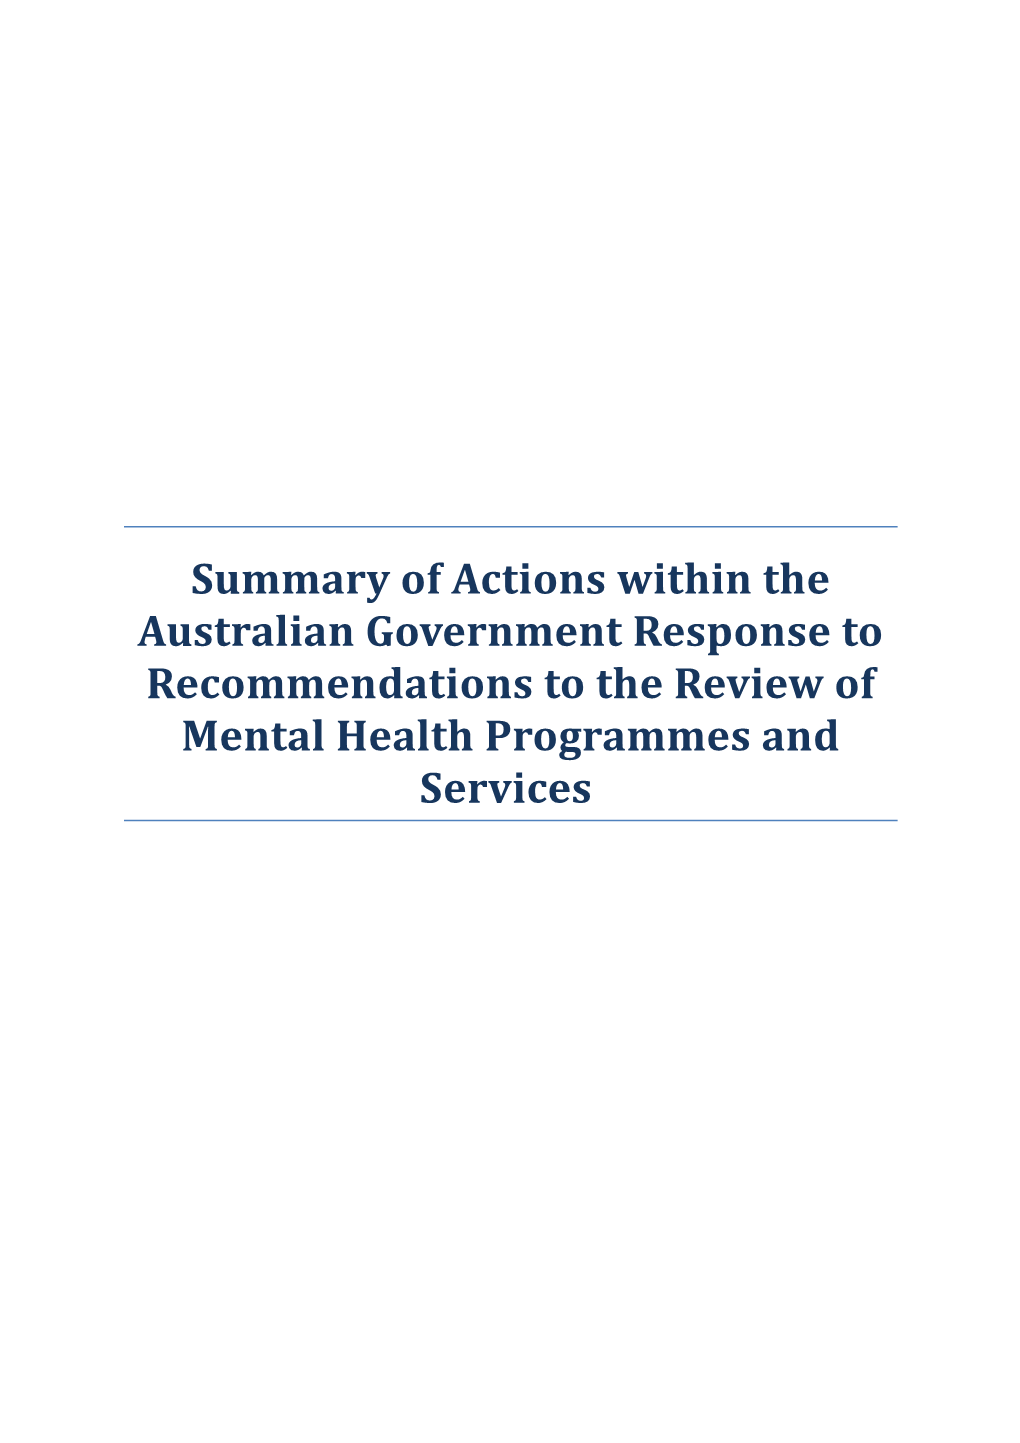 Summary of Actions Within the Australian Government Response to Recommendations of The